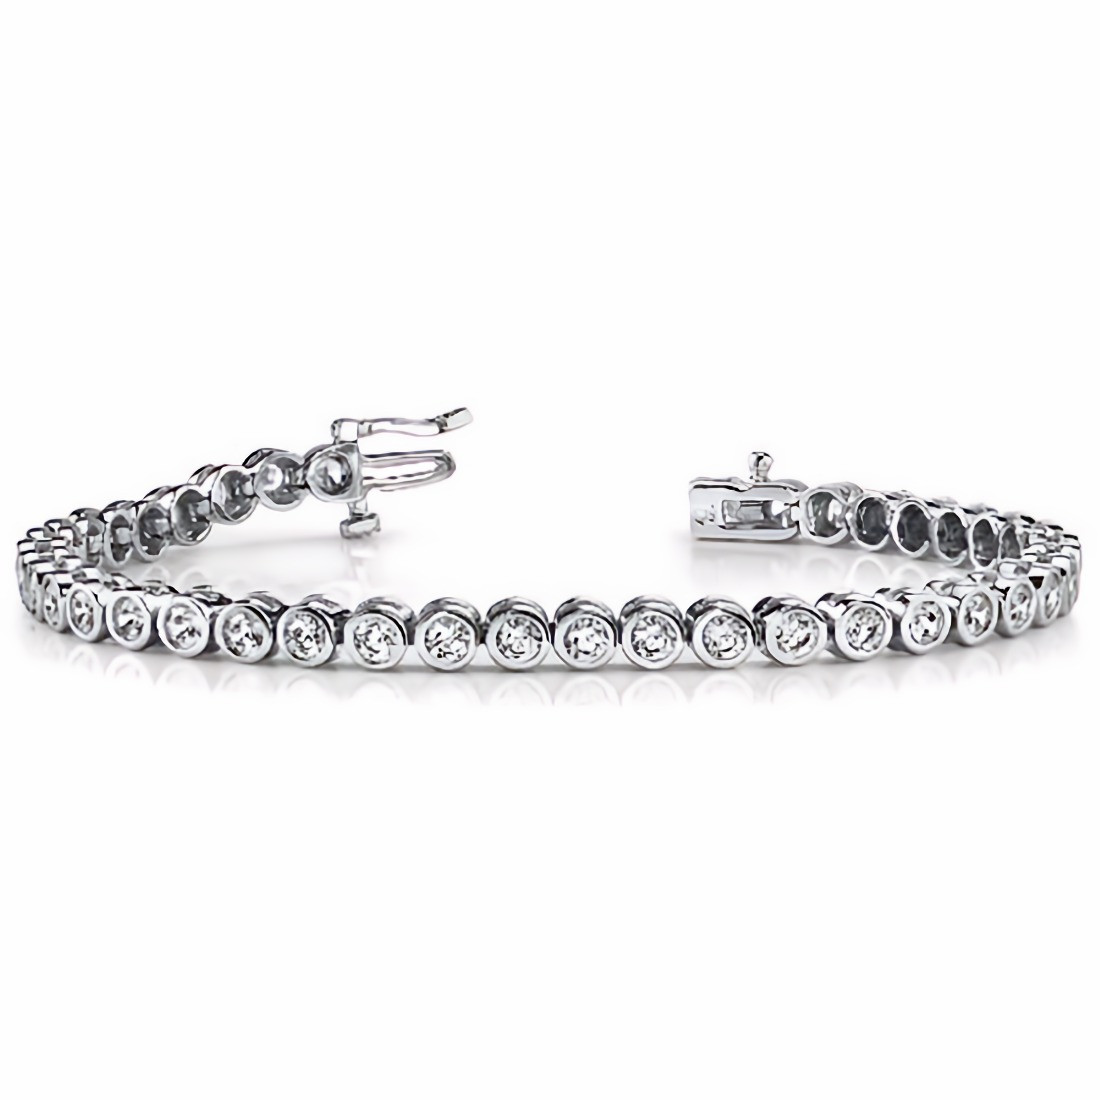 Buy 4 Ct Diamond Tennis Bracelet Double Row Lab Grown 7 18k White Gold G-H,  SI1SI2 Online in India - Etsy